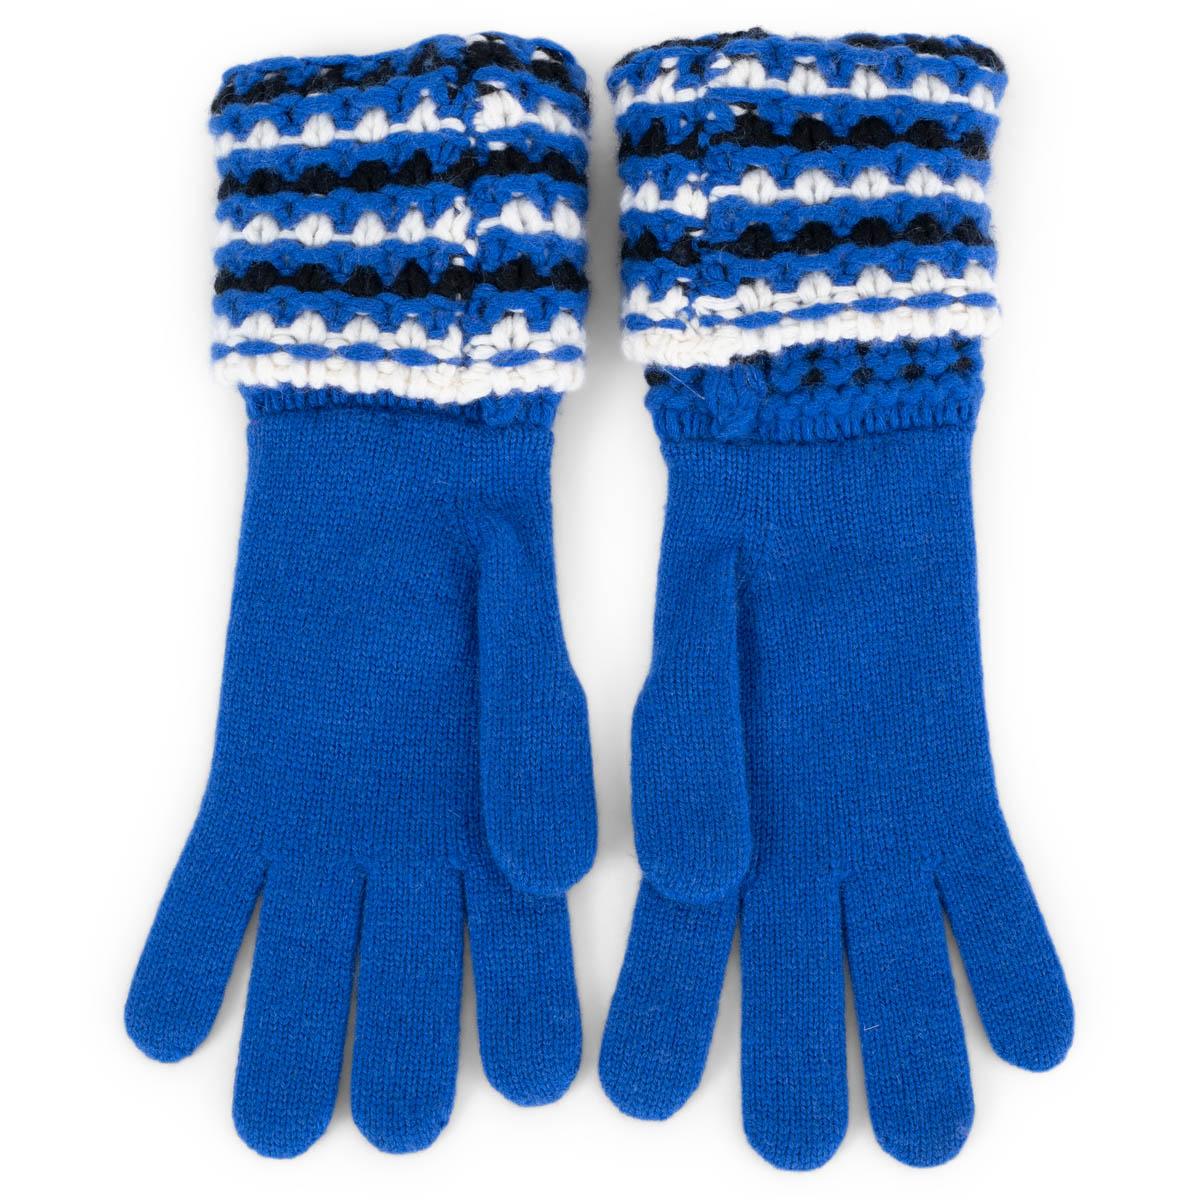 100% authentic Chanel CC knit gloves in electric blue, ivory and black cashmere (100%). Have been worn and are in excellent condition. 

Measurements
Tag Size	OS
Middle Finger to Wrist	30cm (11.7in)
Width	9cm (3.5in)

All our listings include only